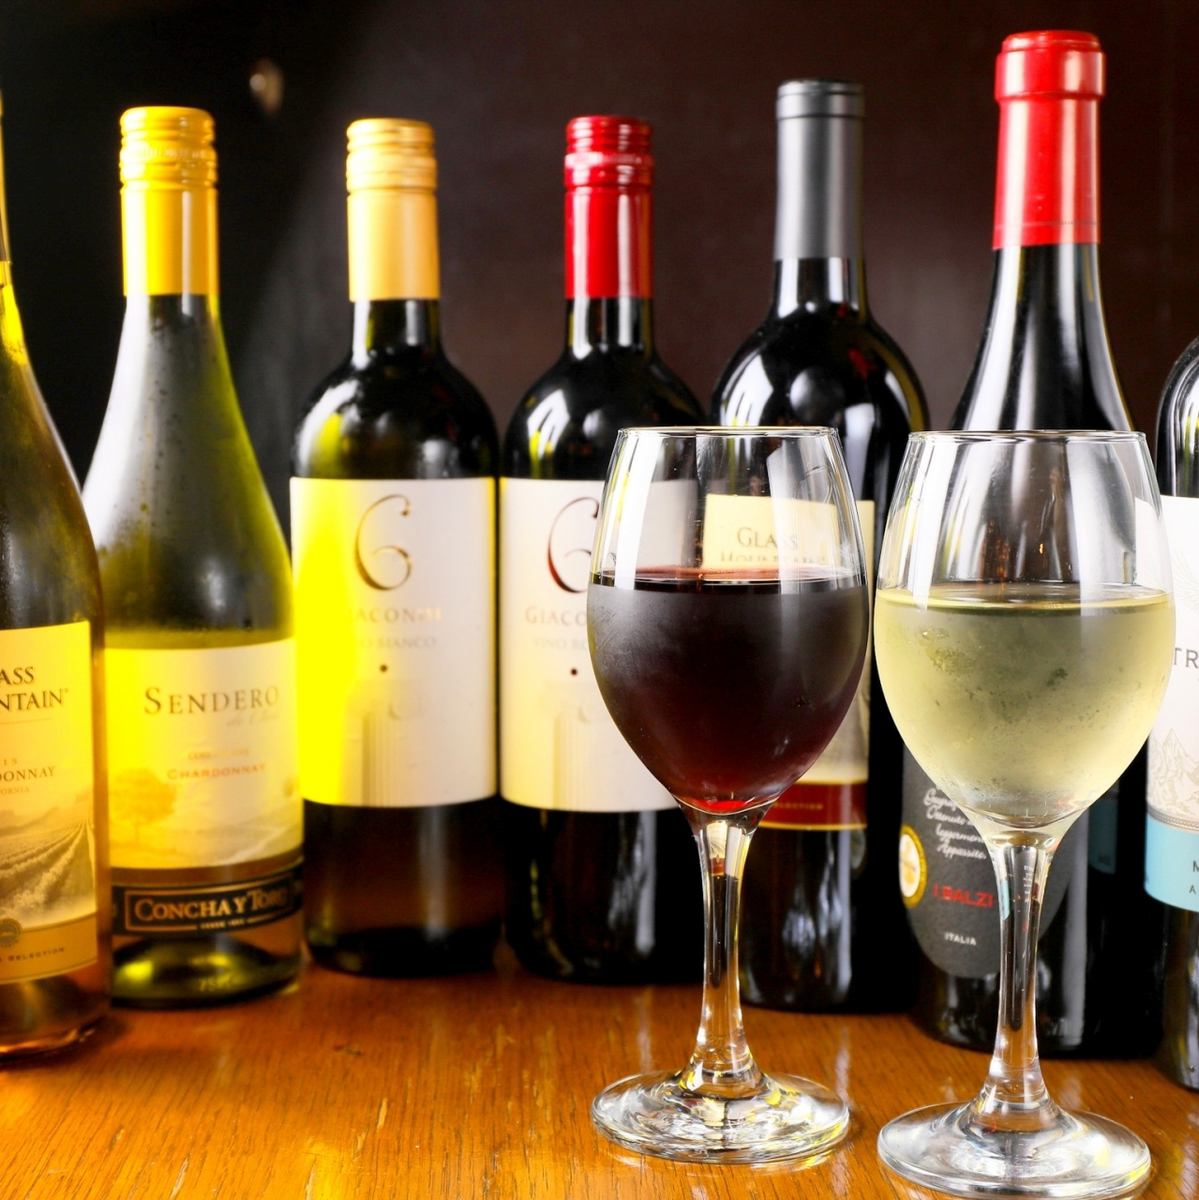 We have a selection of carefully selected wines and champagnes.